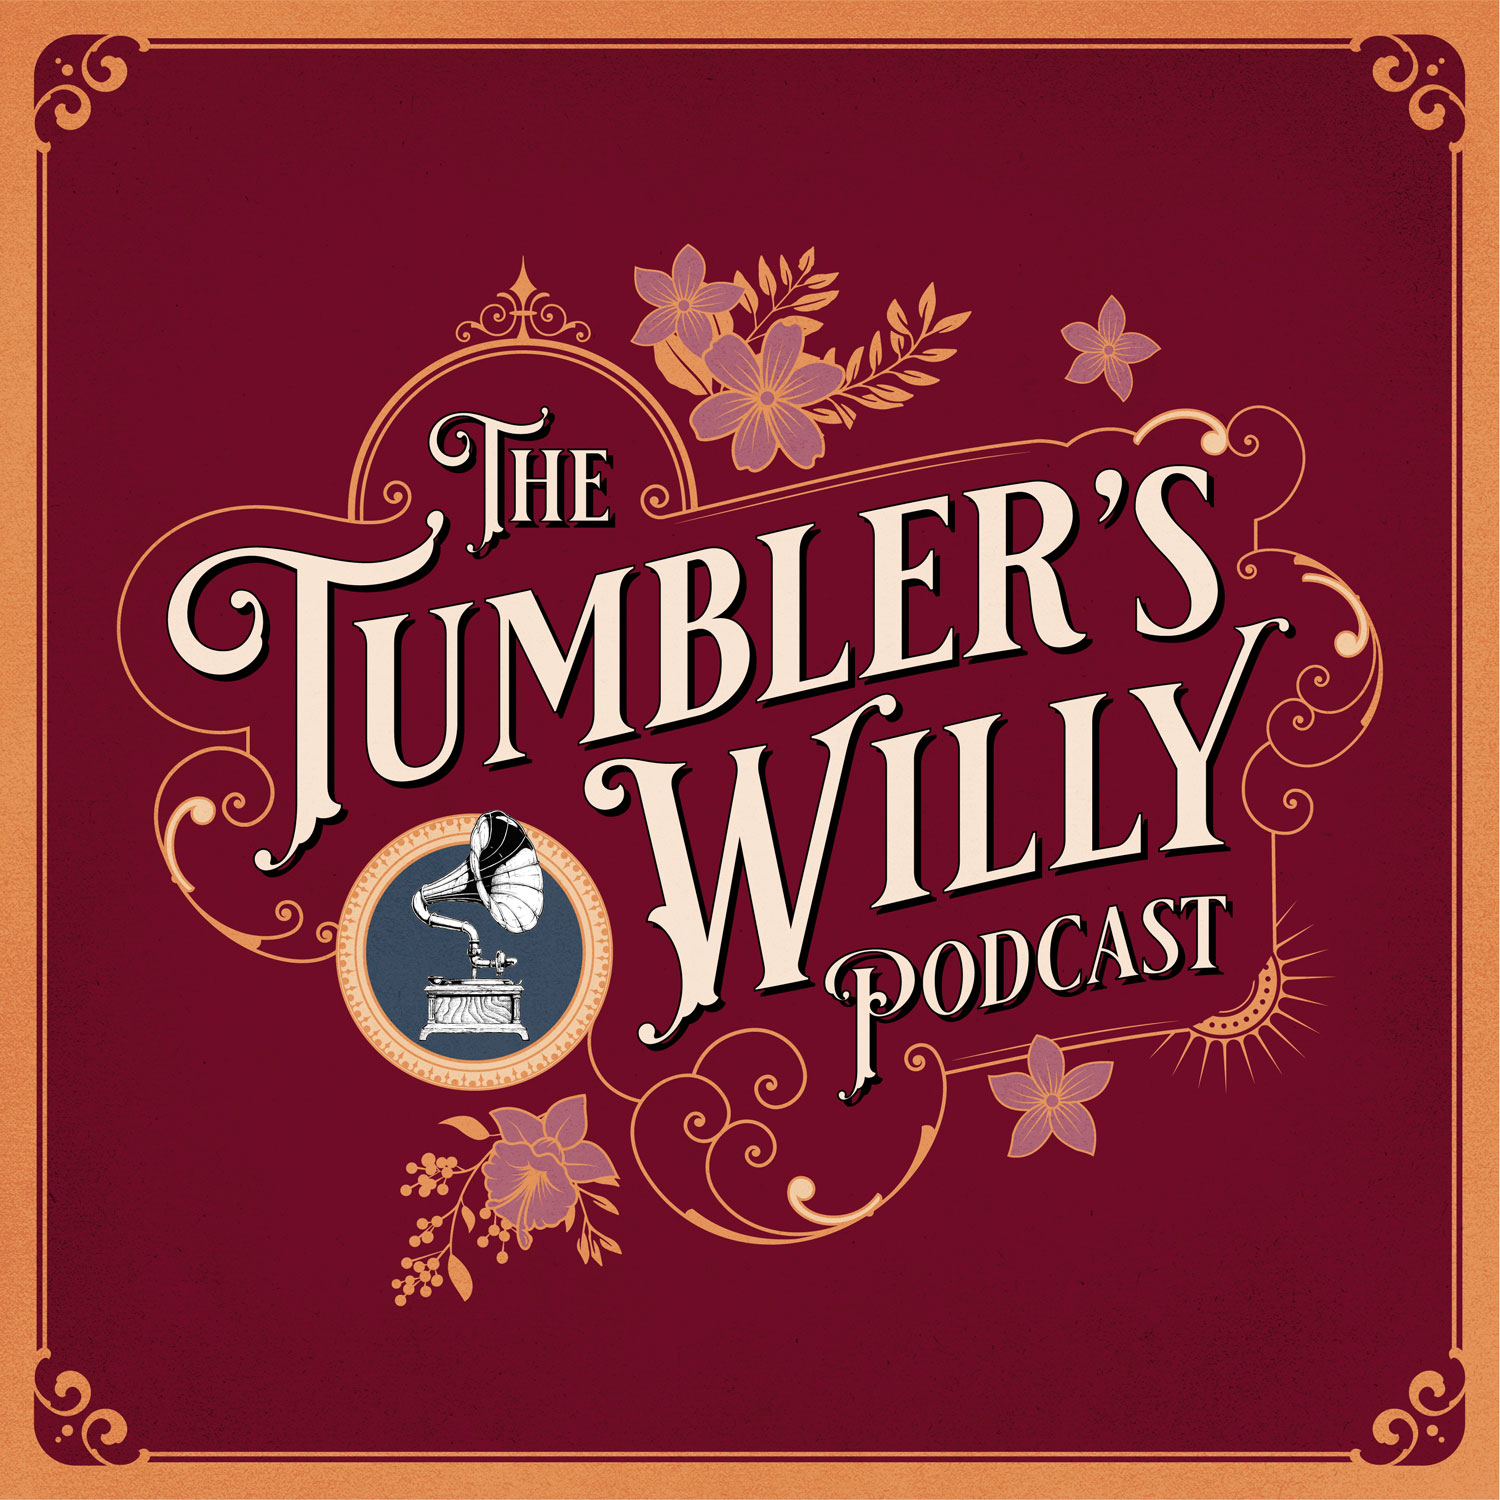 The Tumbler’s Willy Podcast